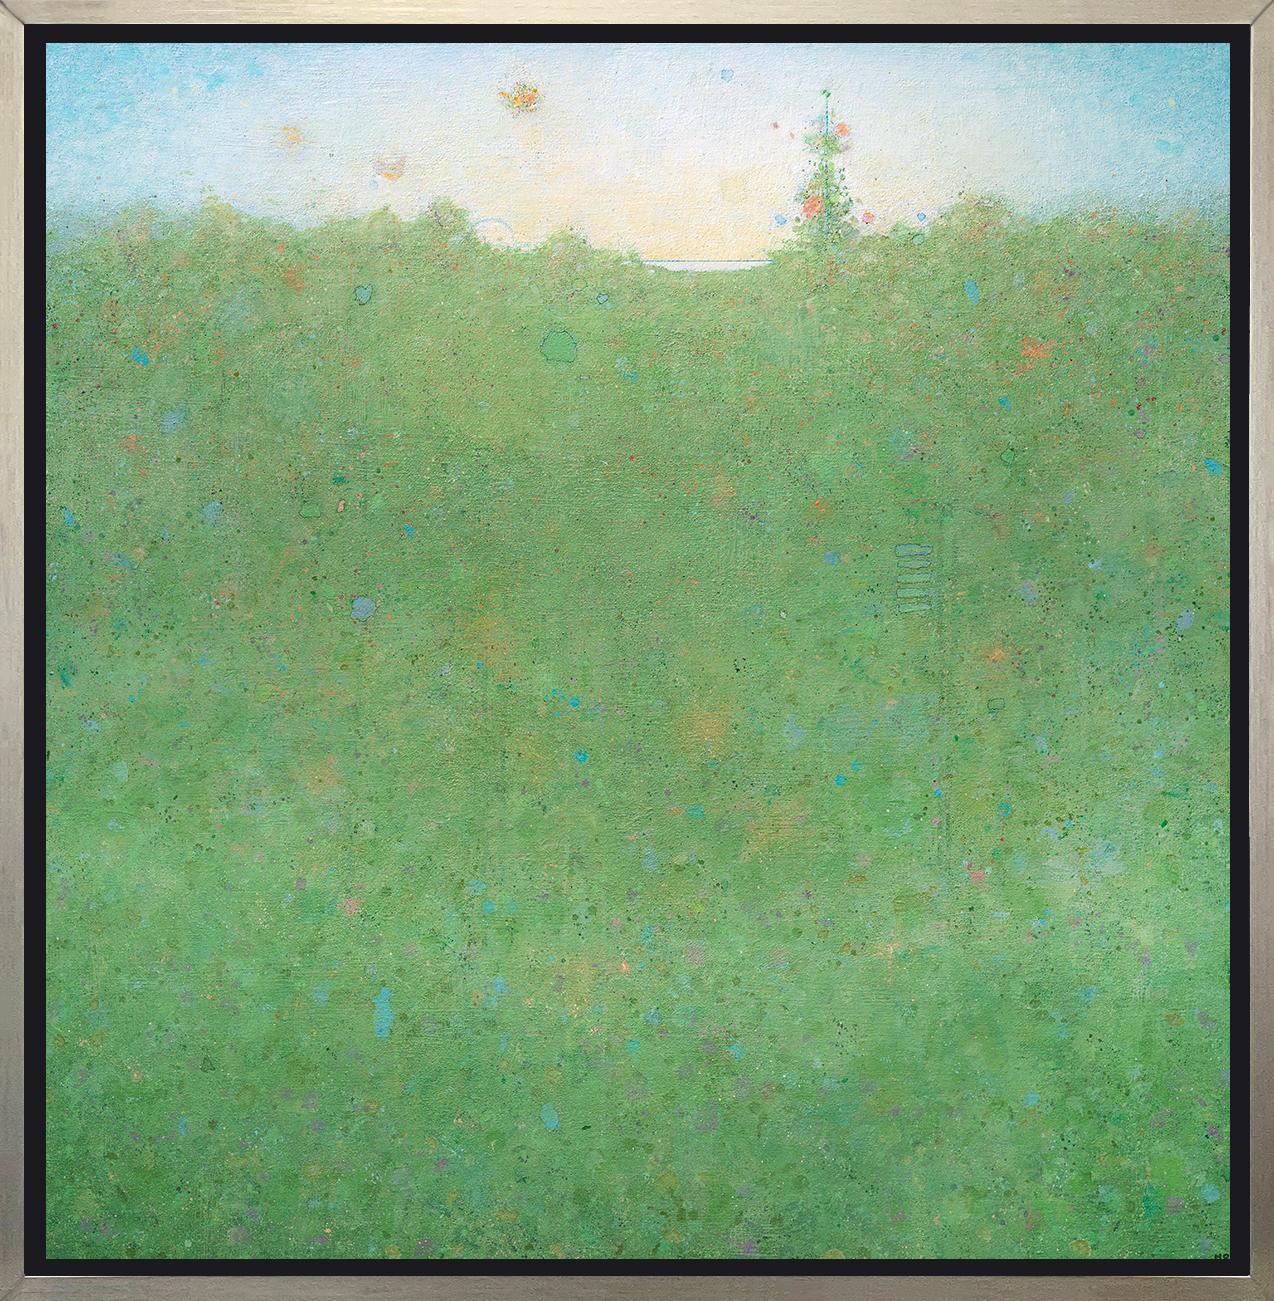 Abstract Print Elwood Howell - "Gicle encadre  tirage limit, 30" x 30", "Springtime".